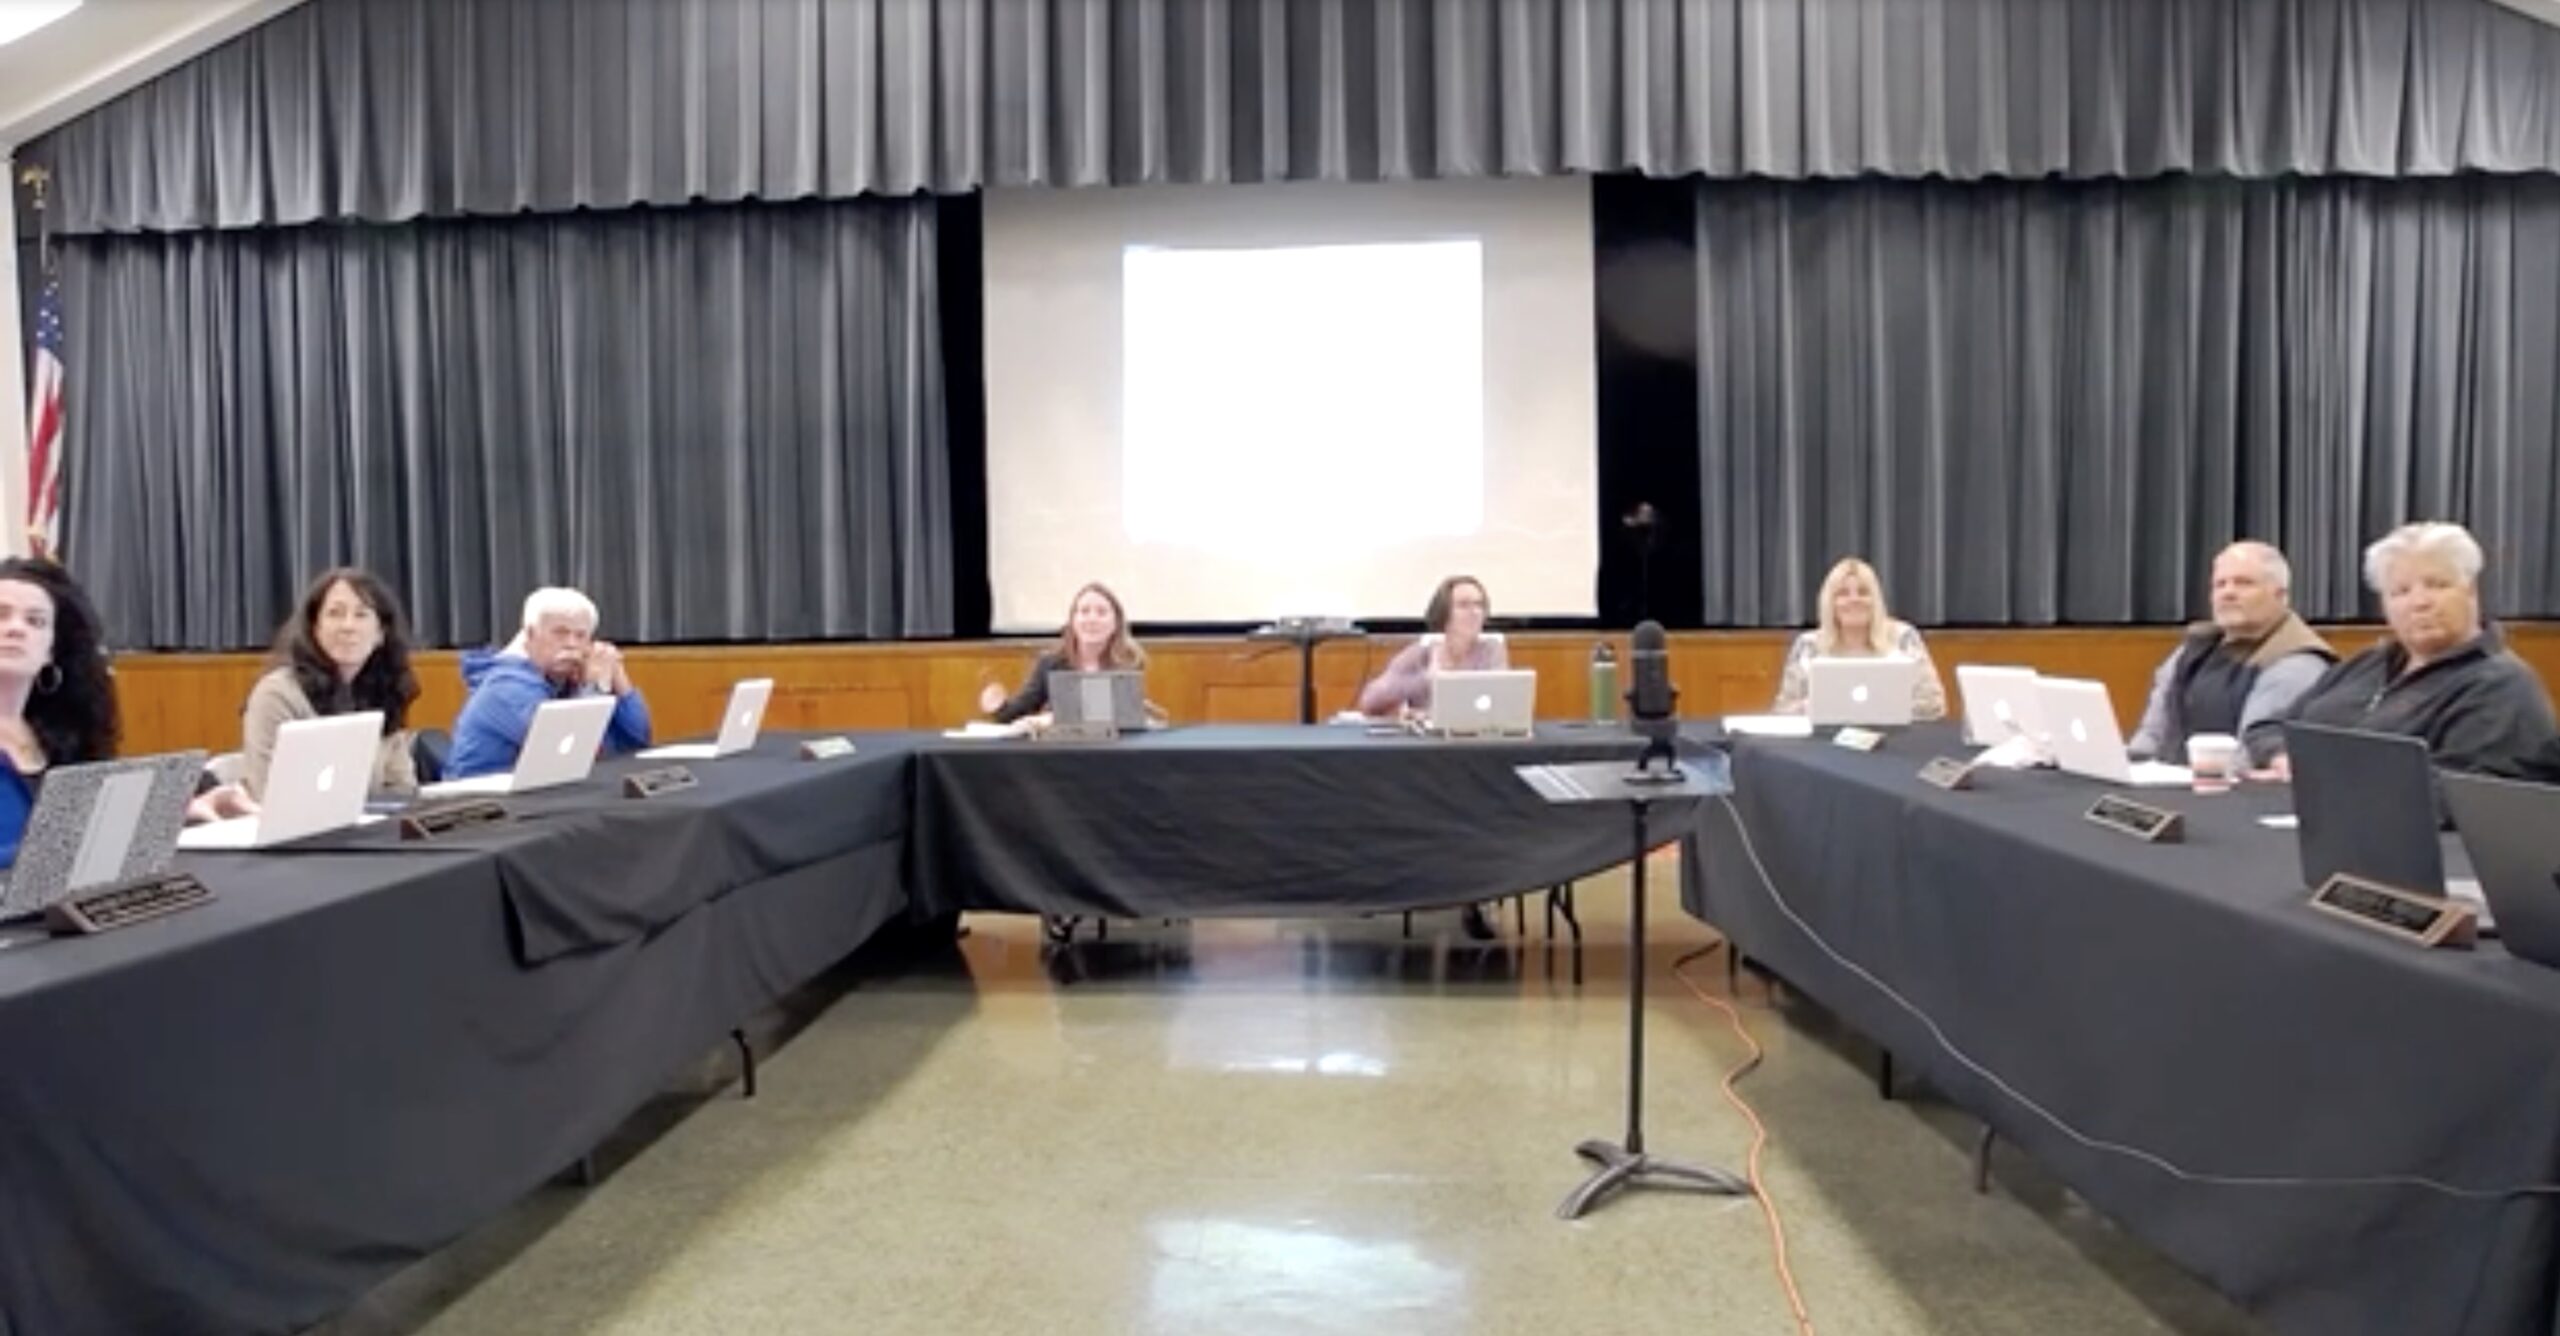 Westhampton Beach administrators and board of education members listen to parents' concerns over vaping and drug use in high school bathrooms.